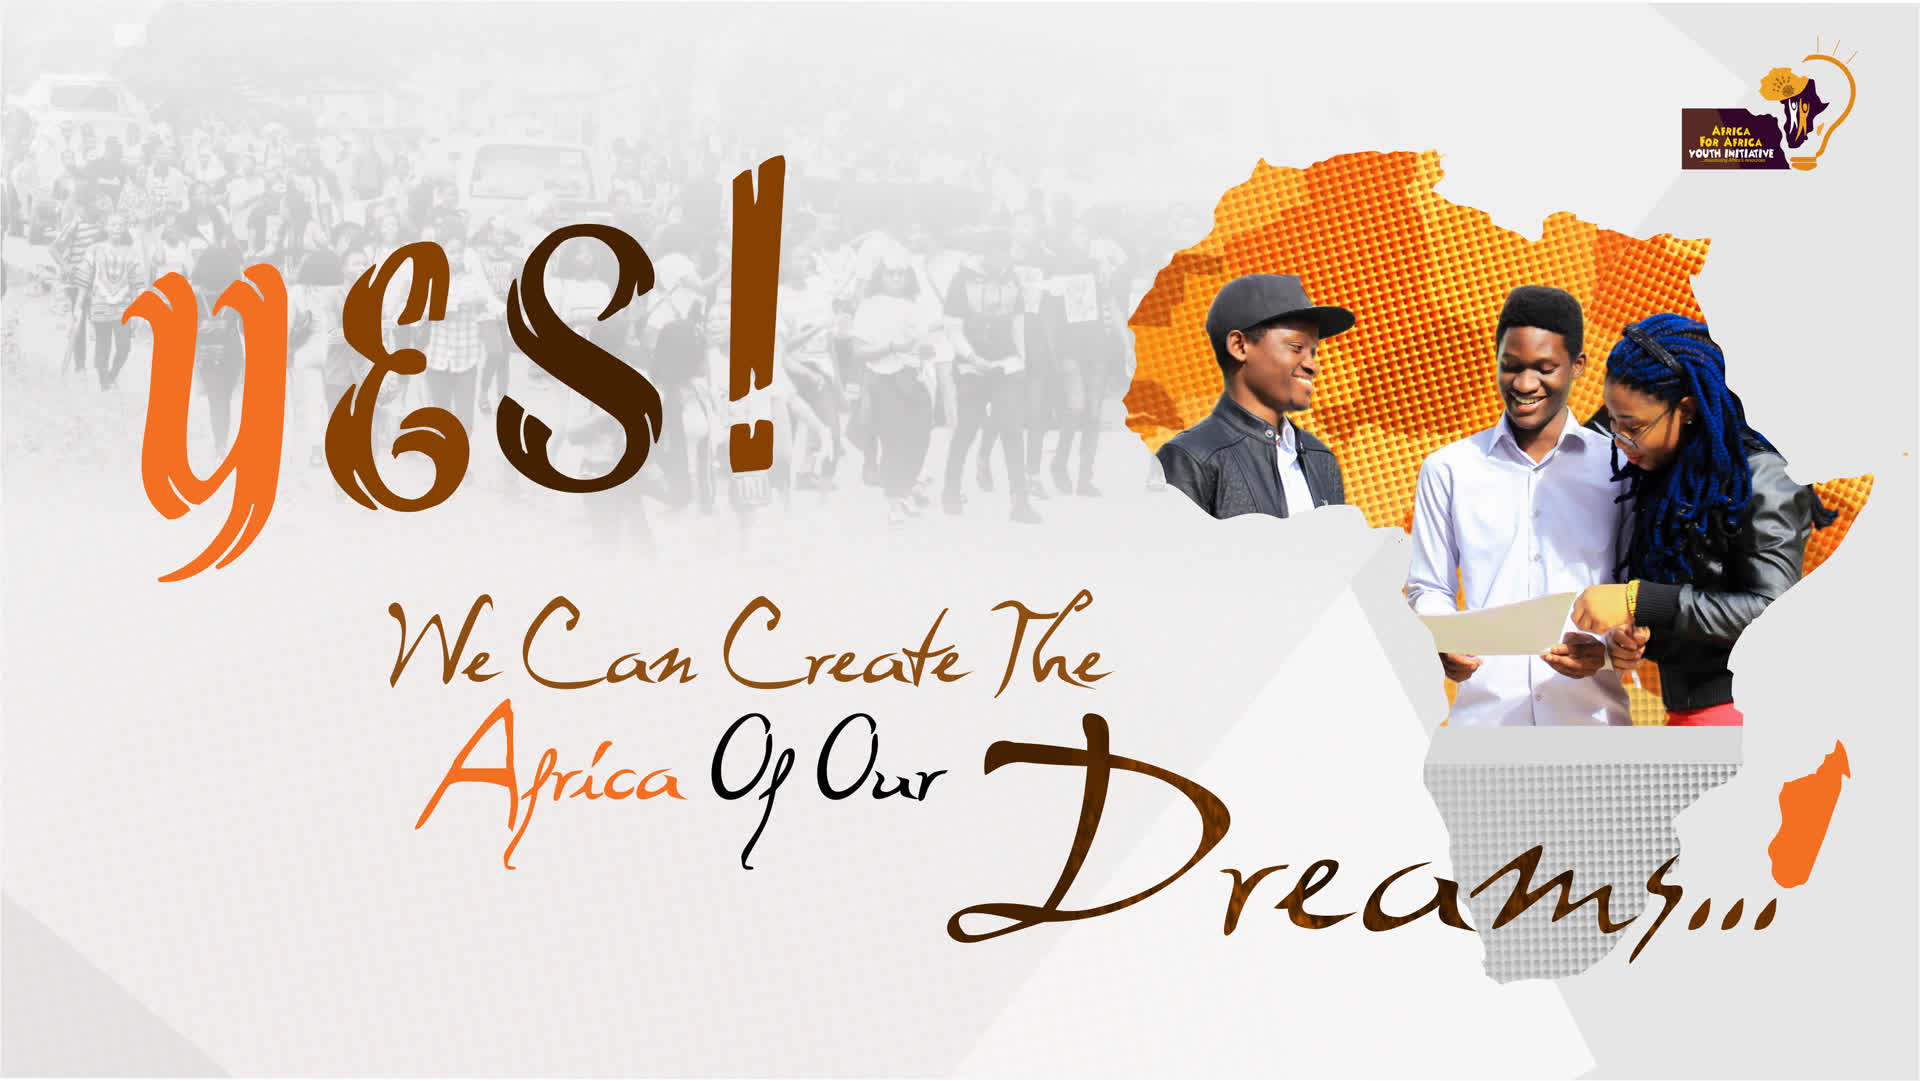 We can create the Africa of our Dreams